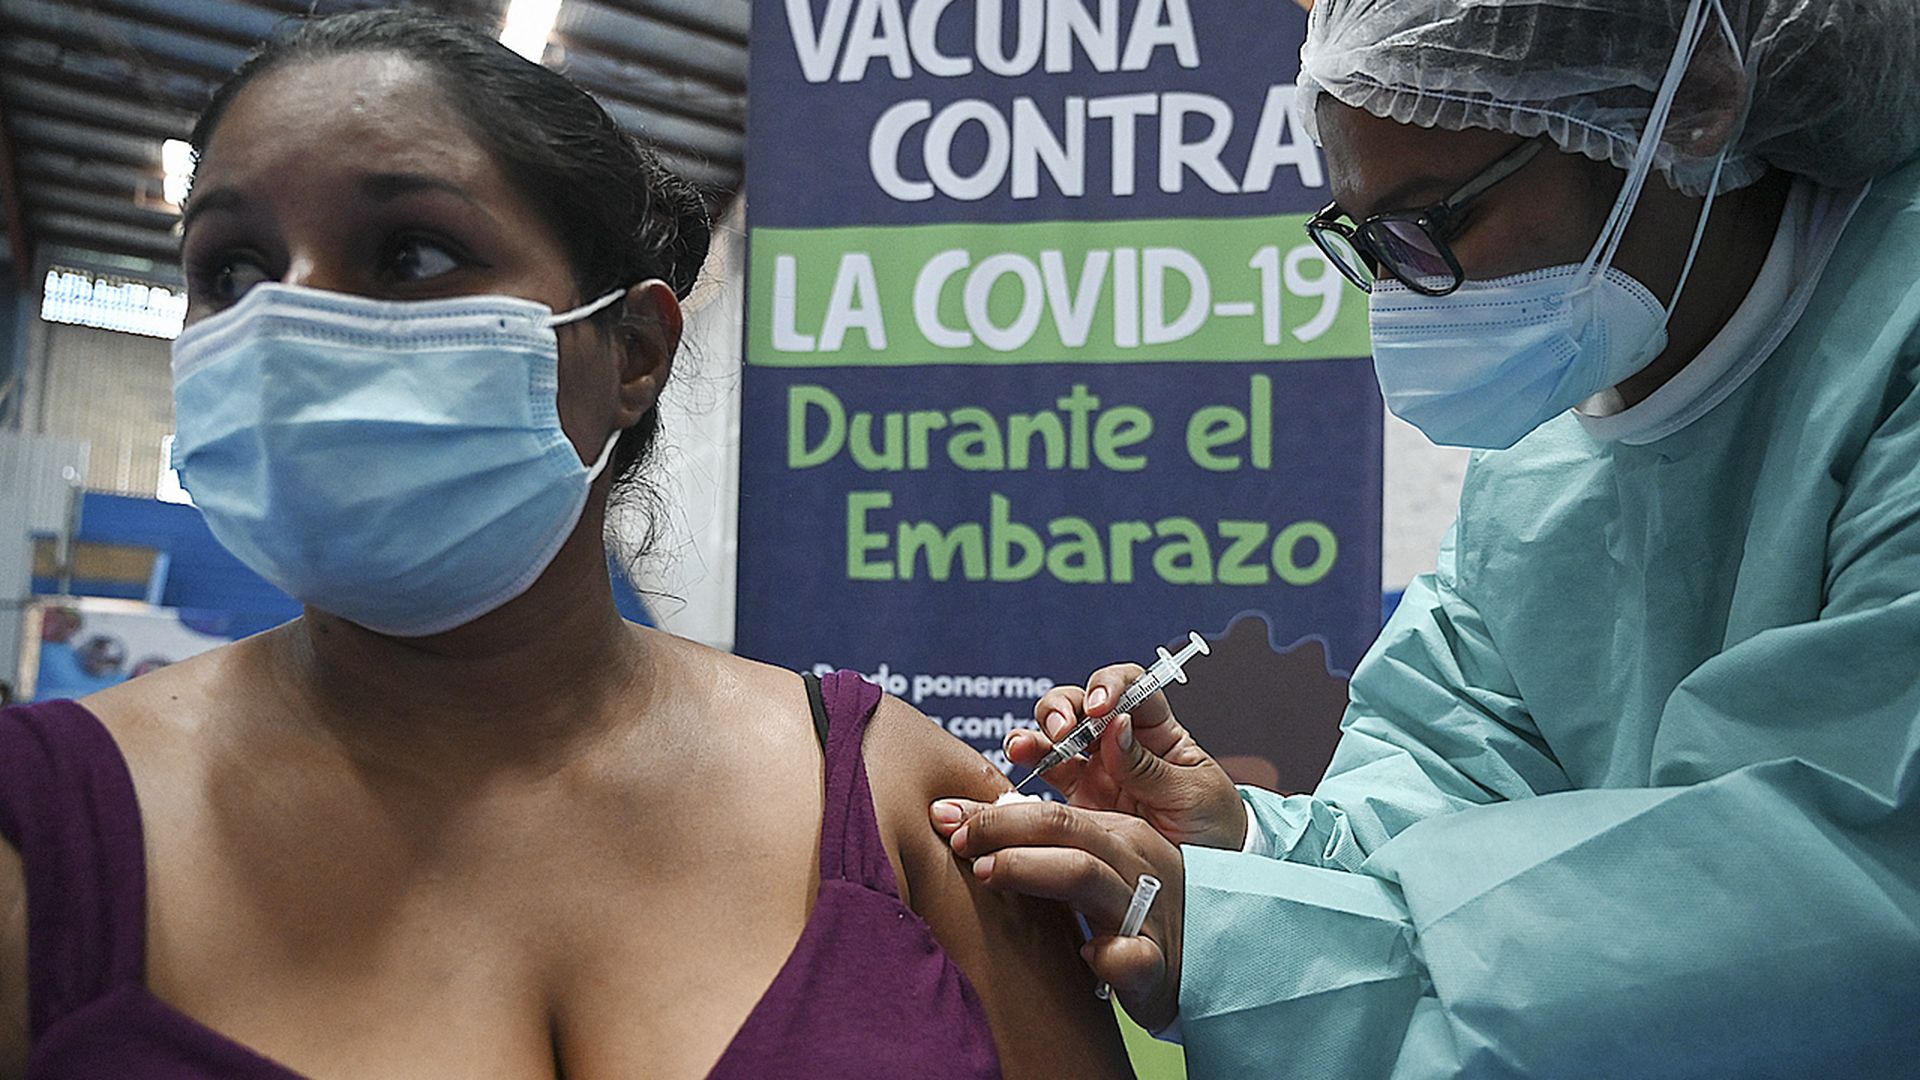 A woman wearing a mask receives a COVID-19 vaccine in the arm